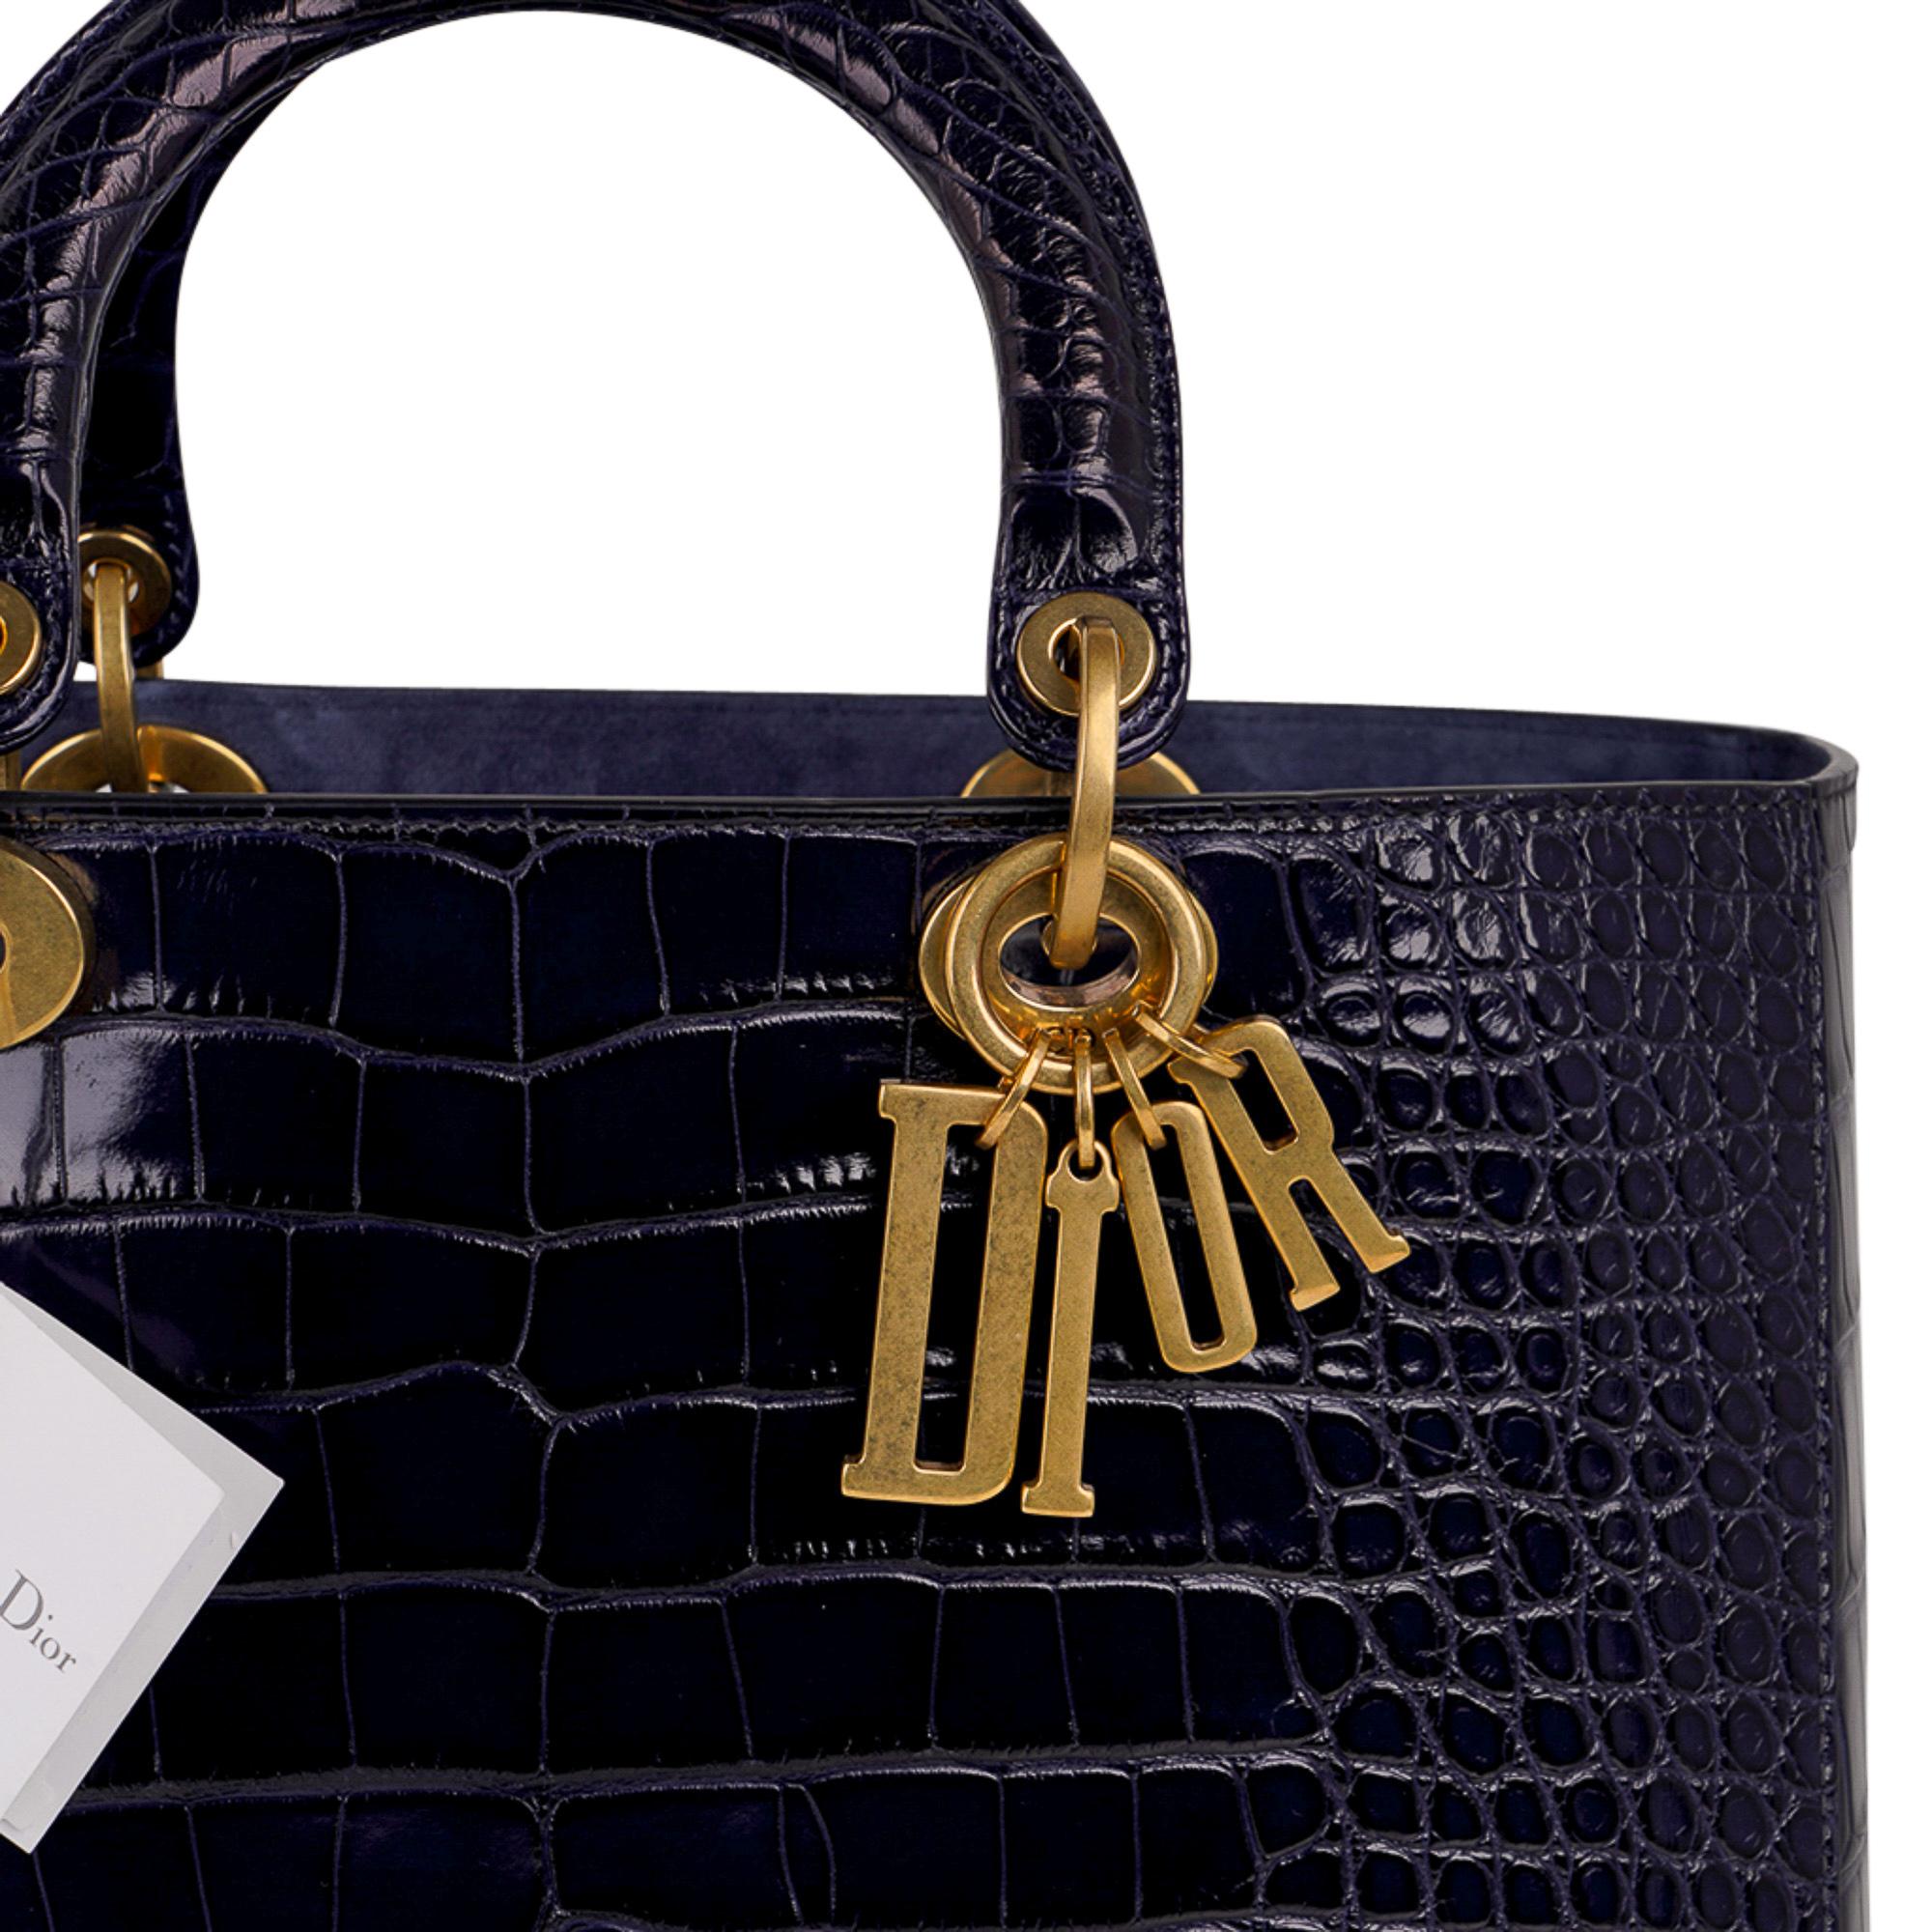 Mightychic offers a Christian Dior Lady Dior Bag featured in rich Navy matte Alligator.
Logo charms are matte brass hardware.
Top flap.
Interior is lined in Blue Suede.
One zip pocket and one slot pocket inside.
Interior exotic leather logo